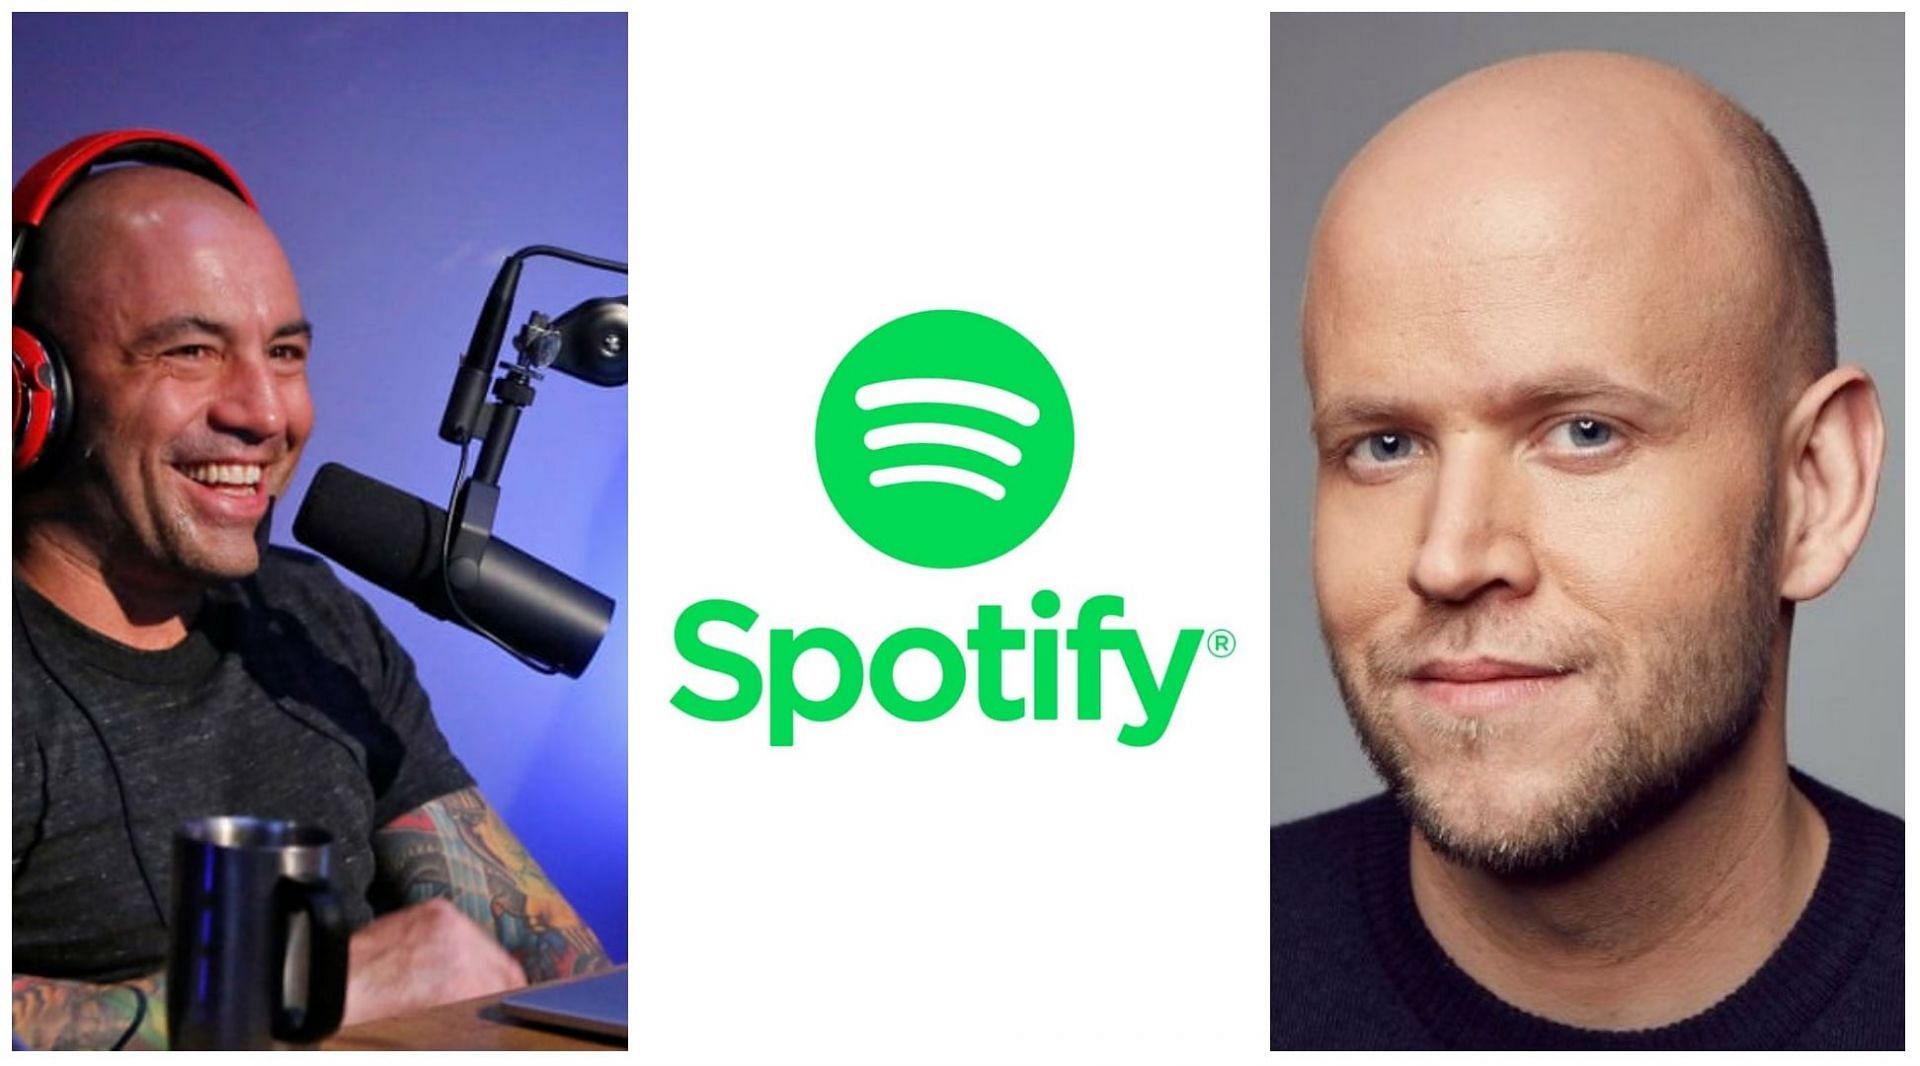 Spotify CEO Daniel Ek has addressed the Joe Rogan controversy in a firm manner in multiple company meetings.